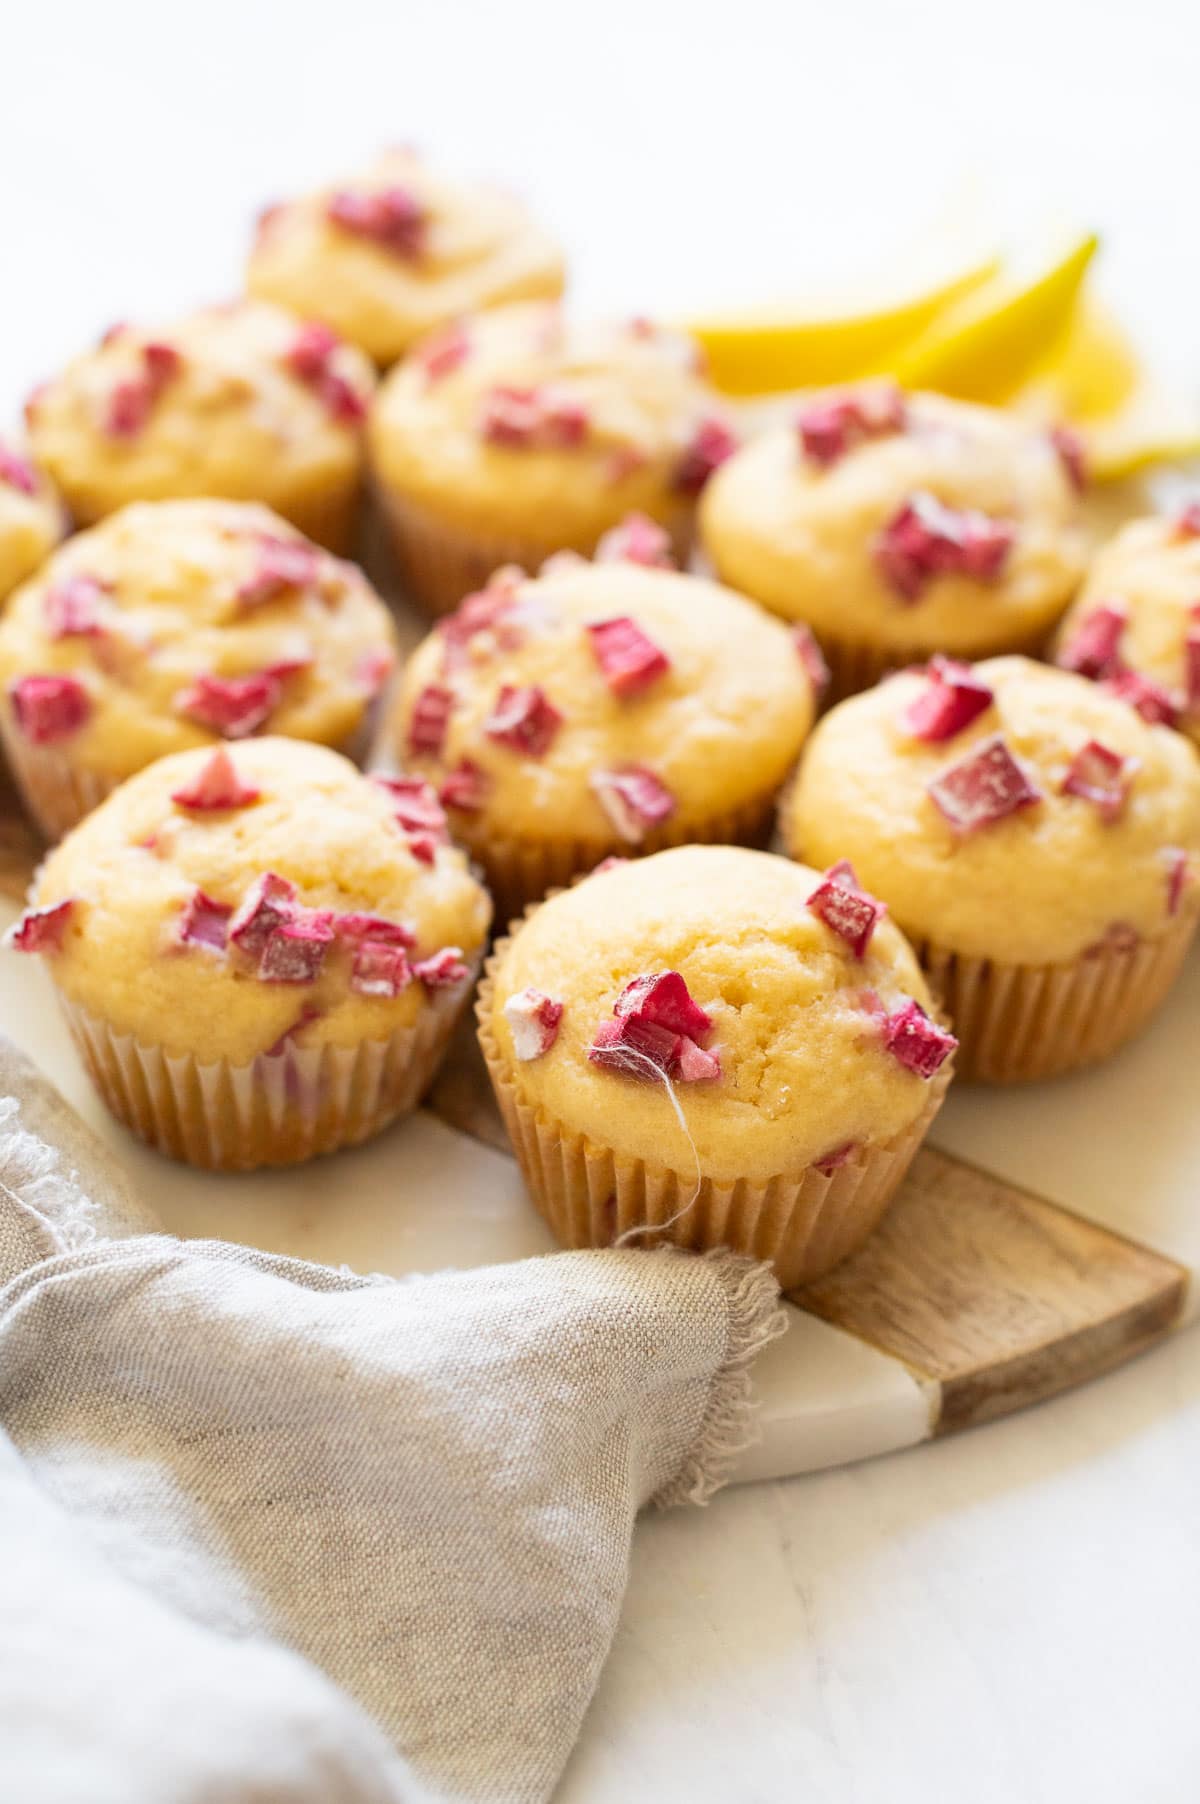 Rhubarb muffins on a serving plate.